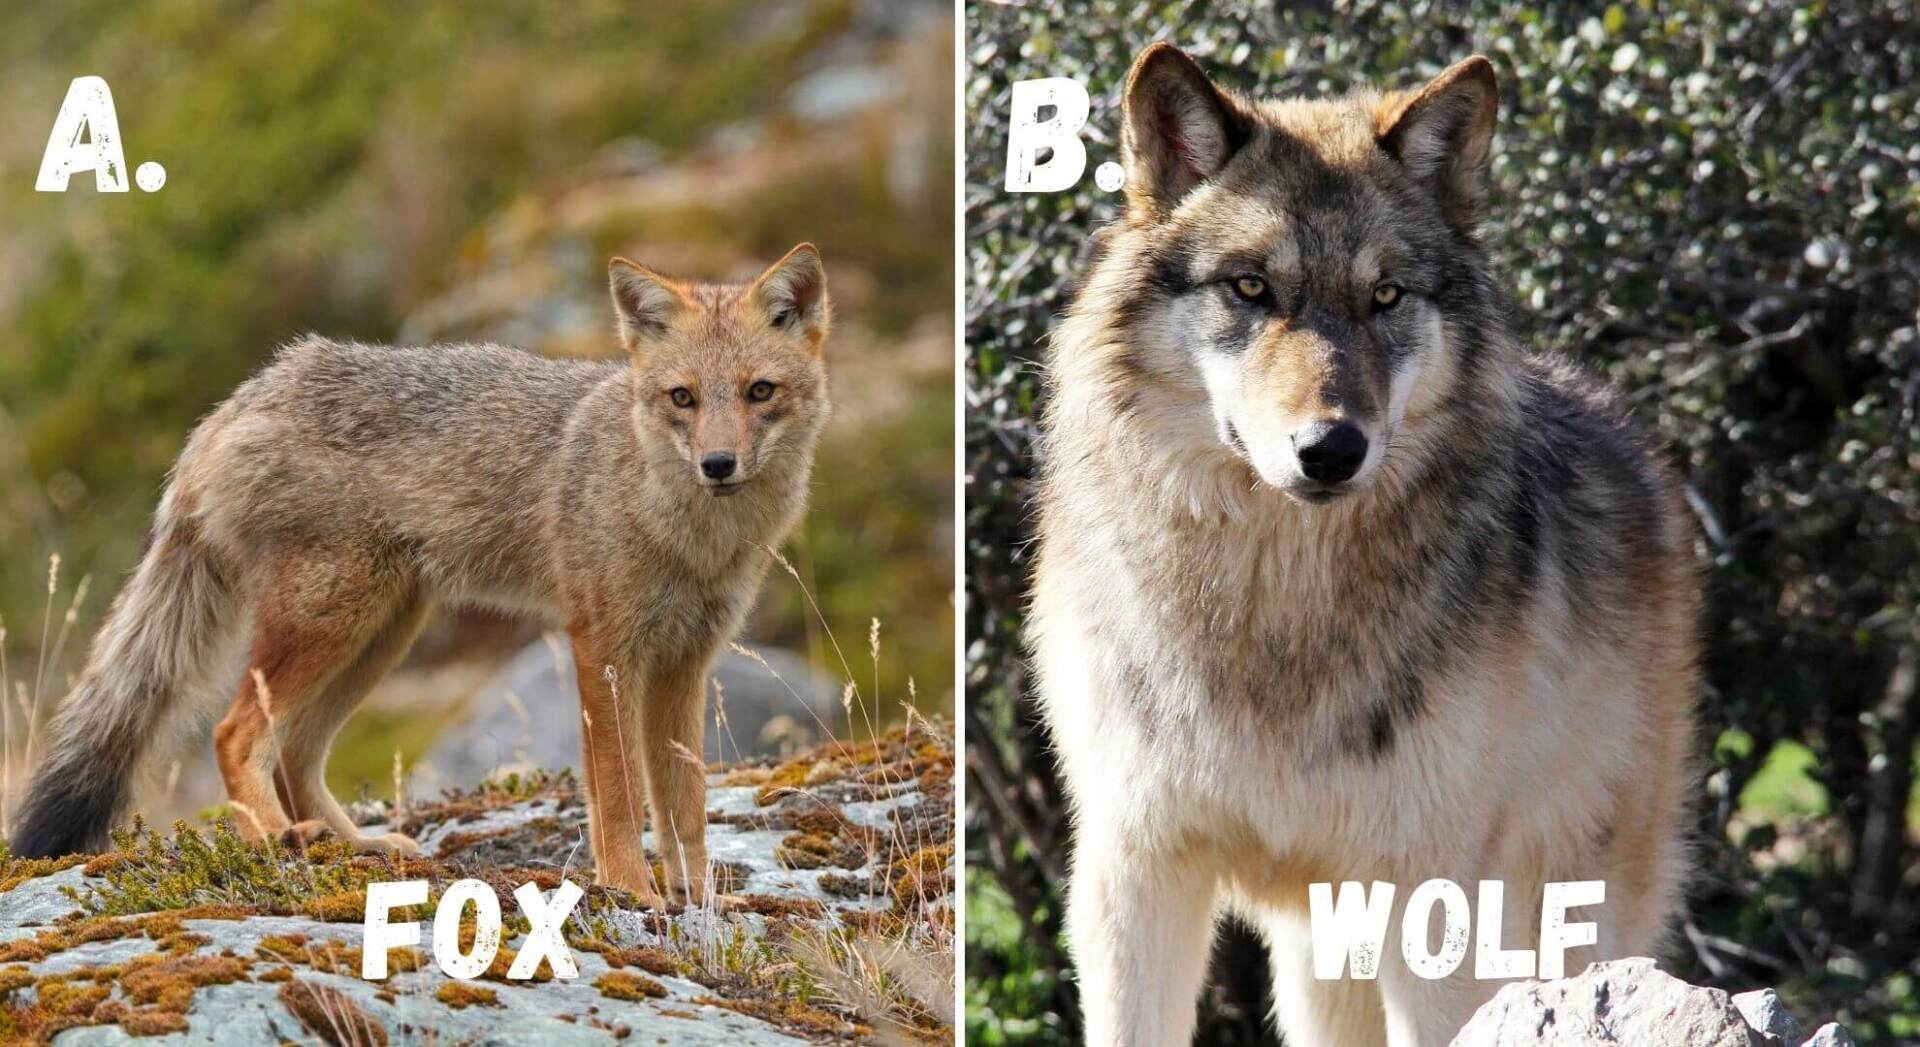 wolves are the apex predator in many temperate ecosystem. Foxes are predators but can be prey for larger predators like wolves.